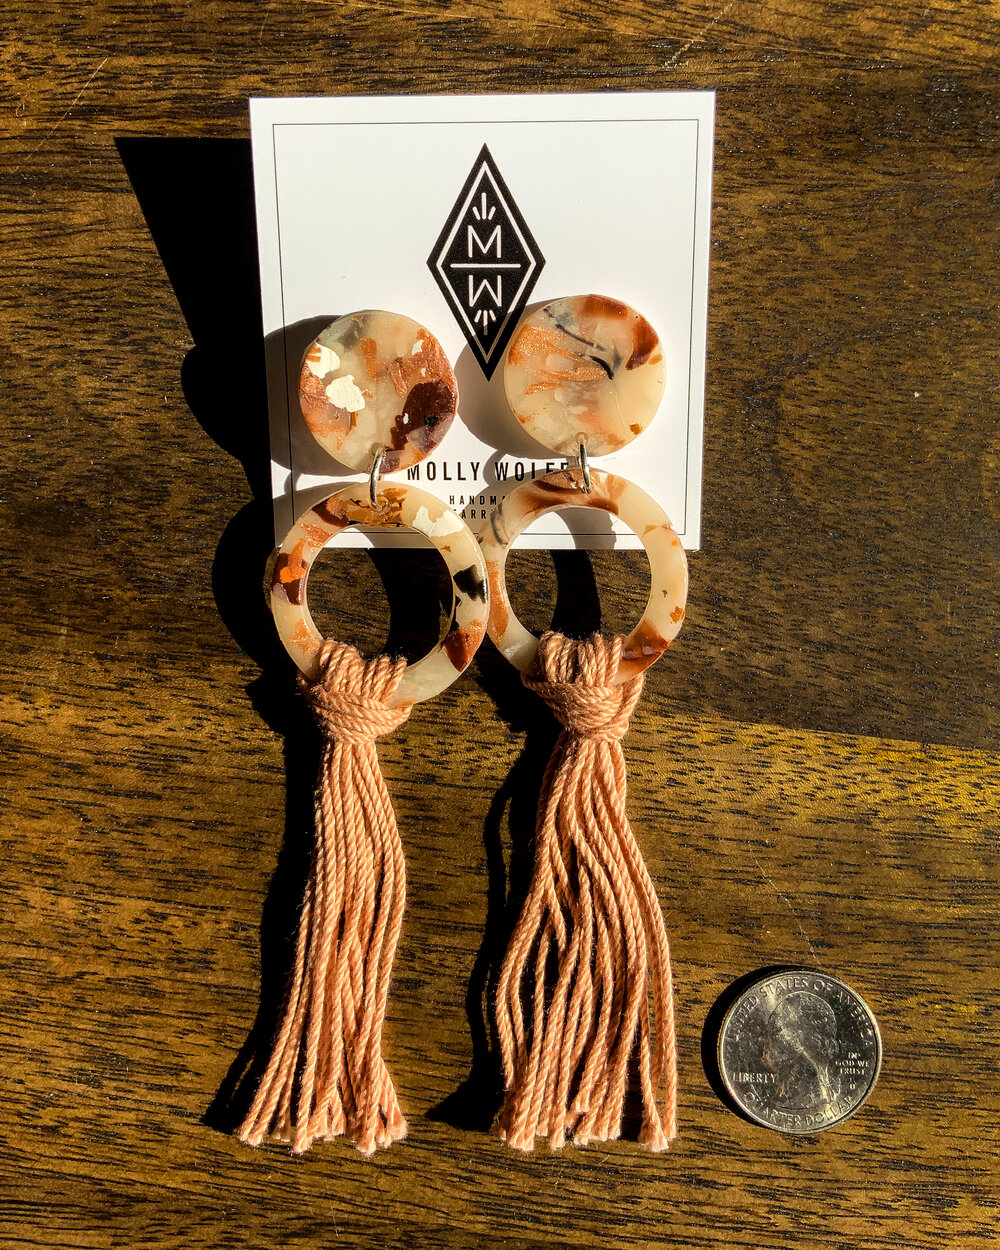 Two salmon-colored tortoise shell earrings on a display card